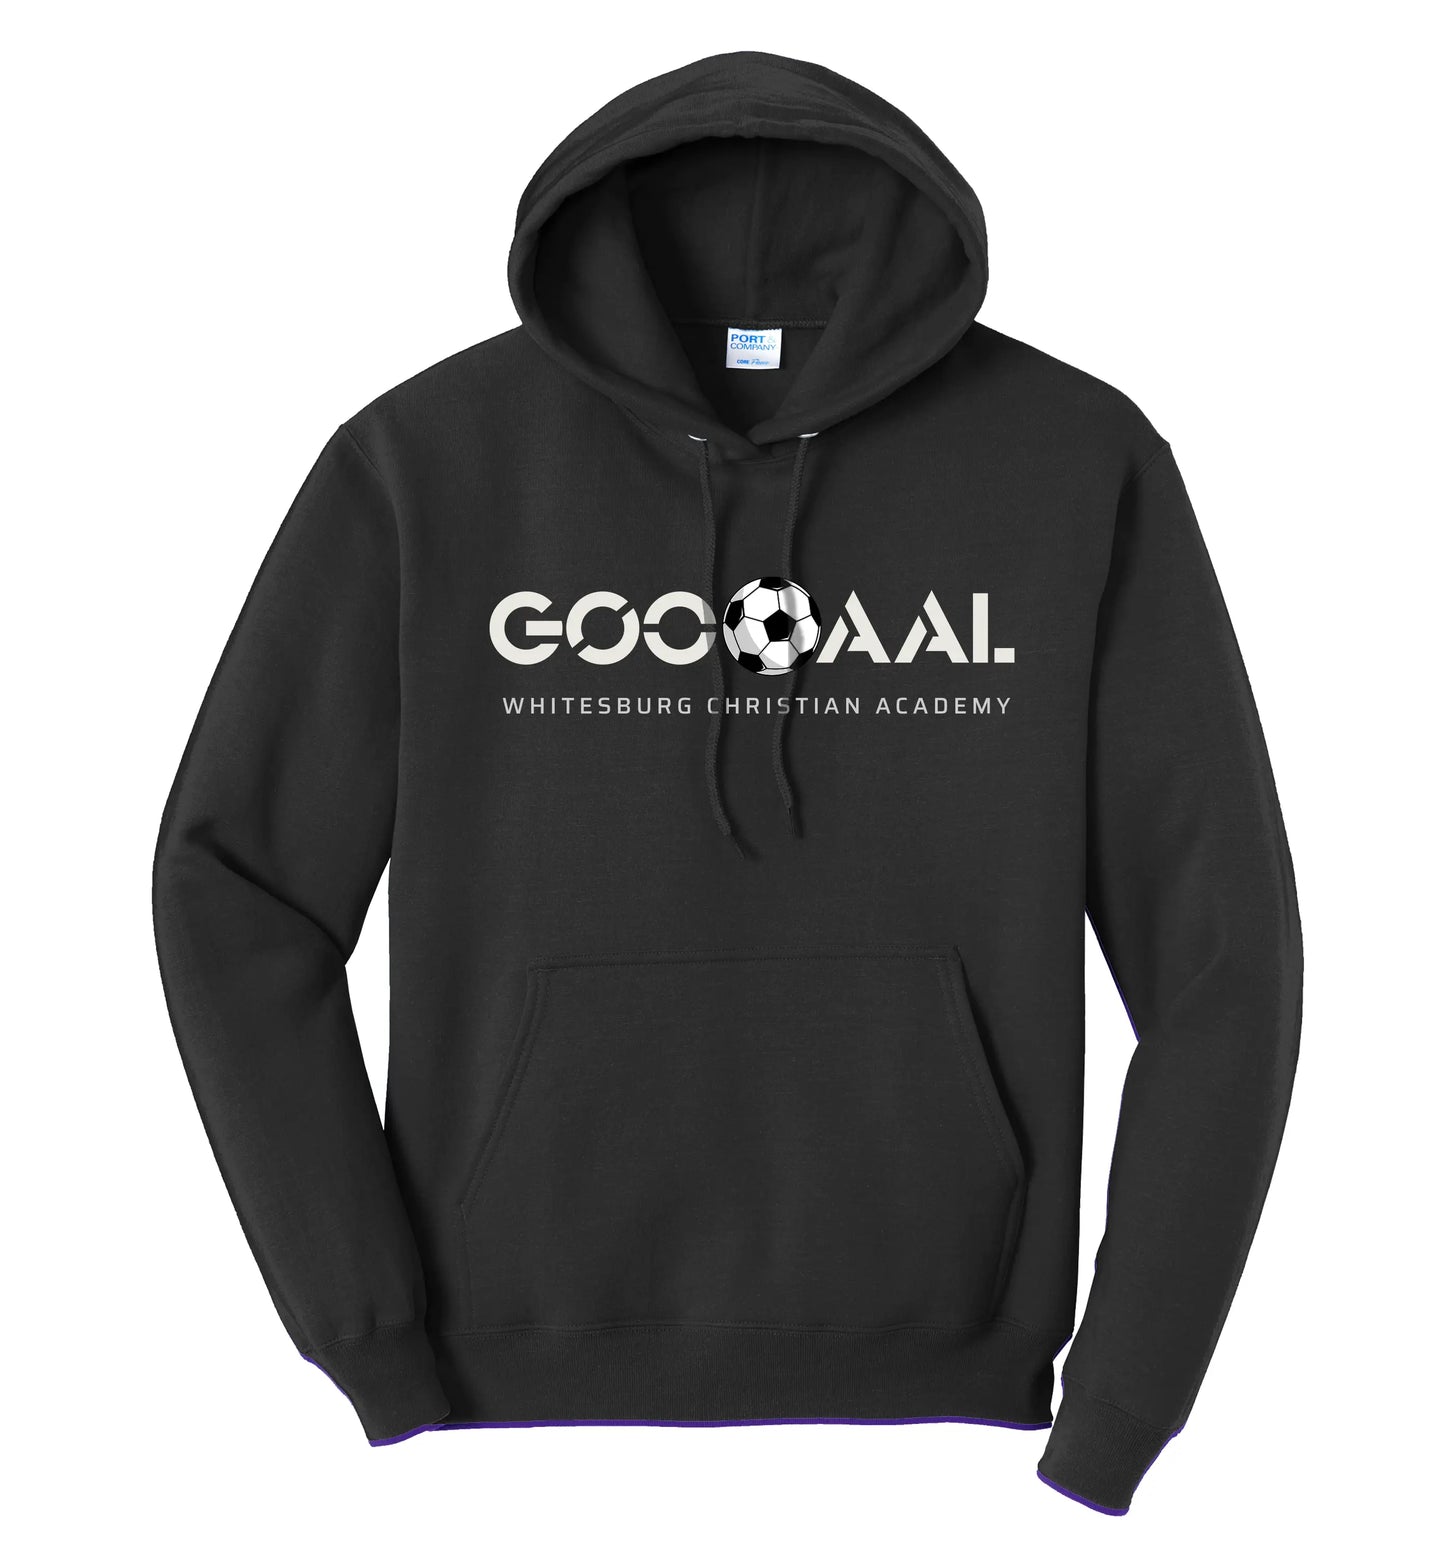 ADULT - SOCCER GOAL Hoodie - PC78H NEW